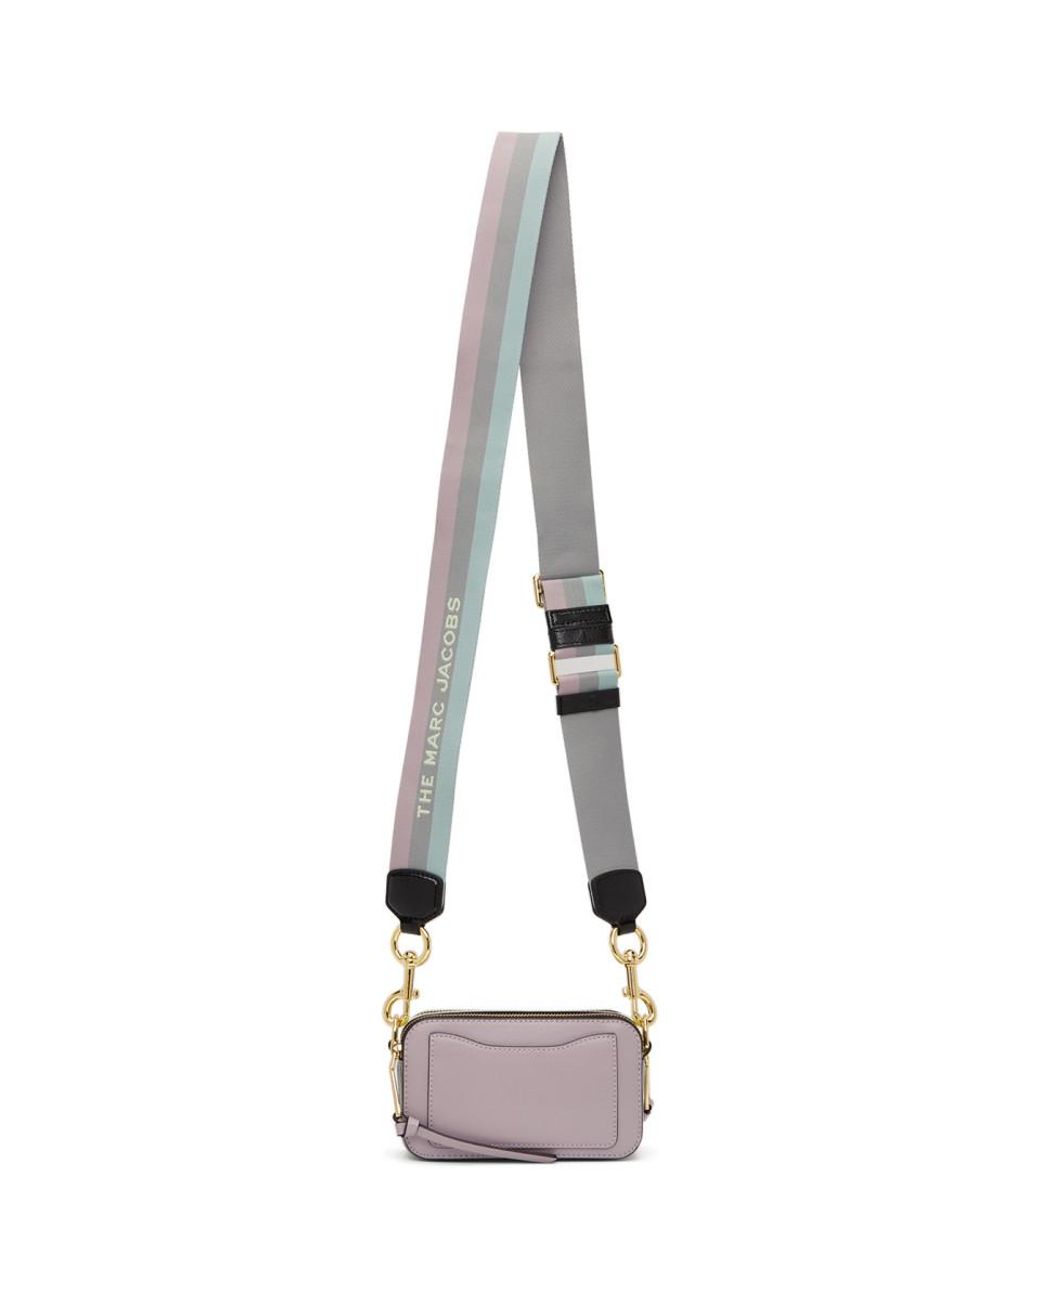 MARC JACOBS: The Snapshot Love multicolor bag - Green  Marc Jacobs  crossbody bags M0016742 online at